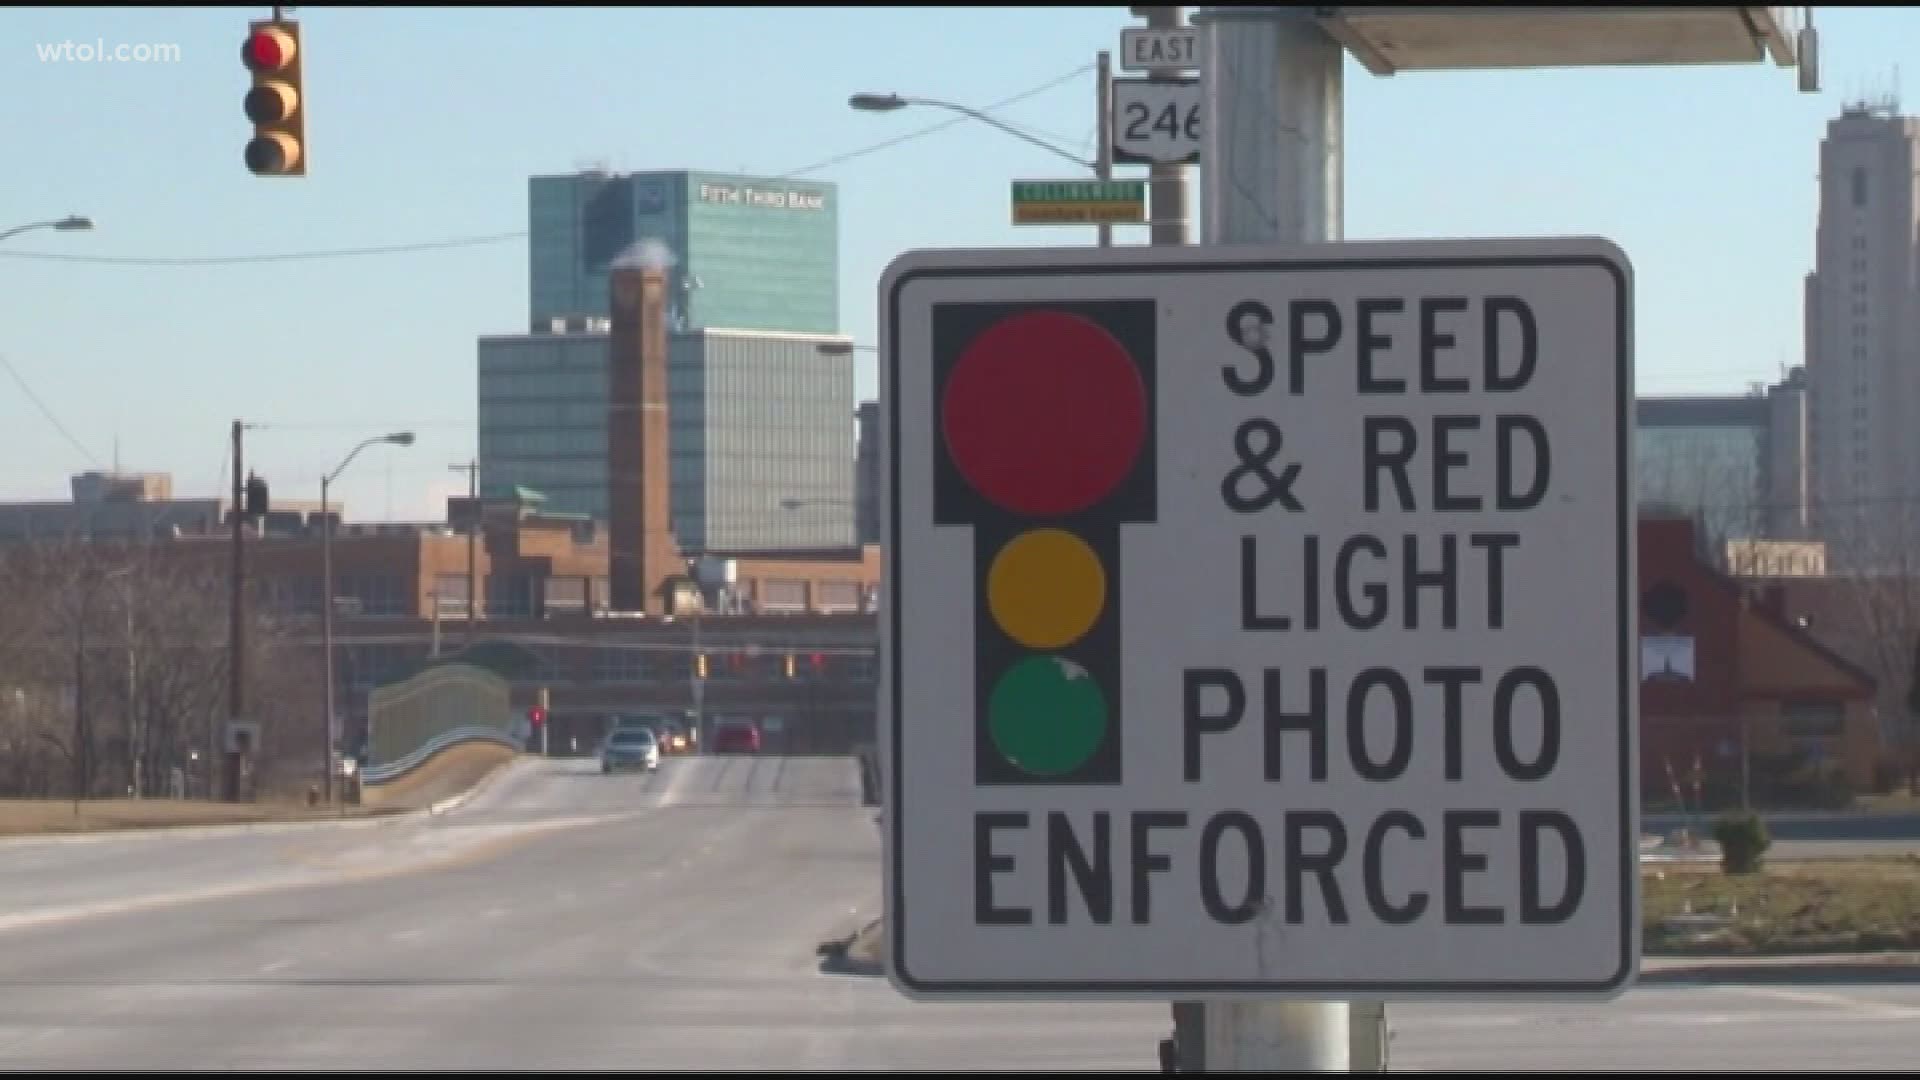 In the decision Magsig v. The City of Toledo, the Ohio Supreme Court ruled municipal courts have the "exclusive jurisdiction" to handle red-light camera violations.